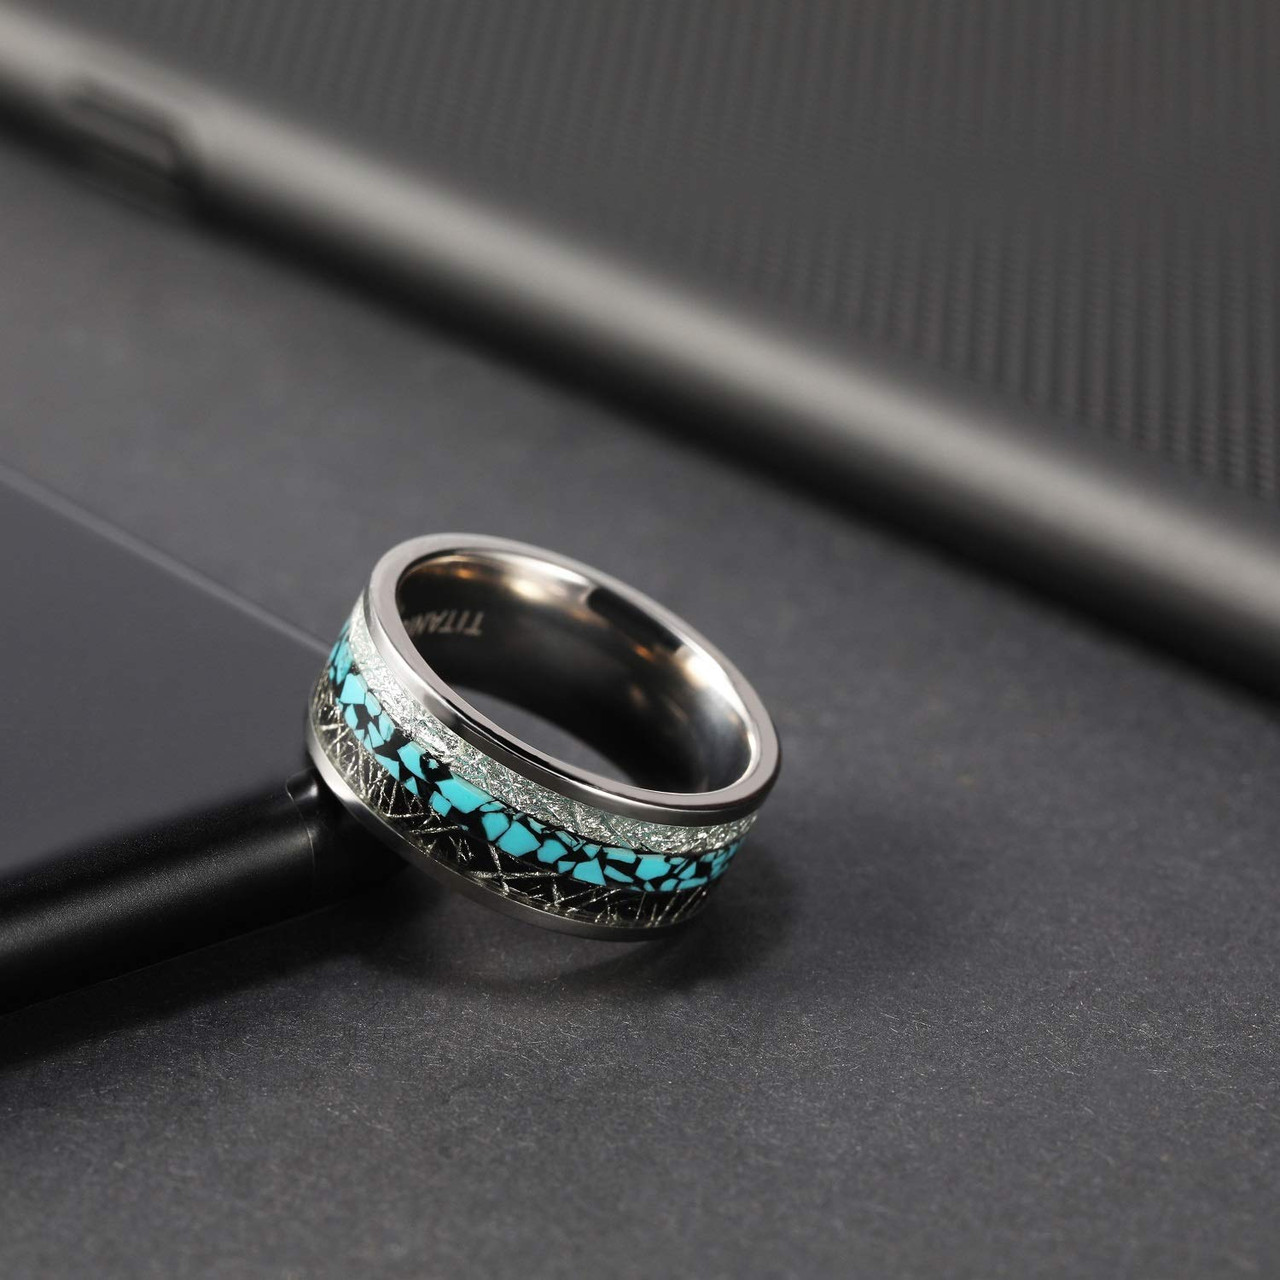 (8mm) Unisex or Men's Titanium Wedding Ring Band. Silver band with Triple Color Turquoise and Duo Inspired Meteorite Inlay. Light Weight and Comfort Fit. 